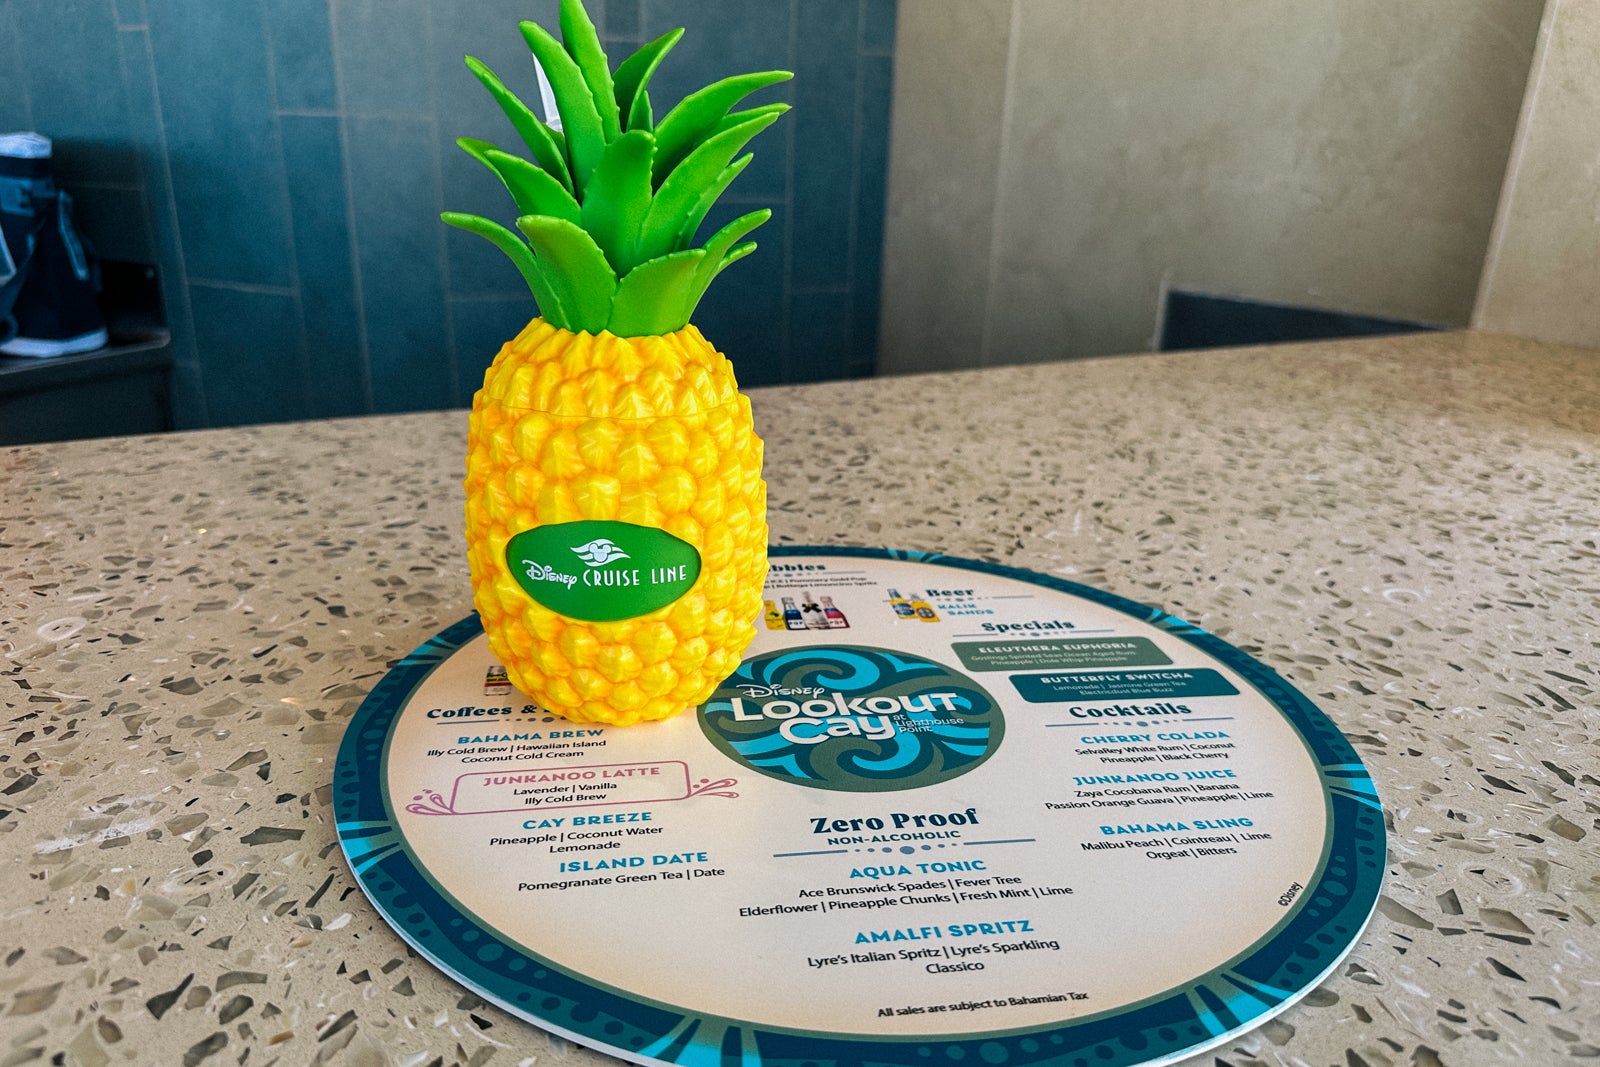 A menu and souvenir pineapple cup from the Reef and Wreck Bar on Disney's Lookout Cay at Lighthouse Point